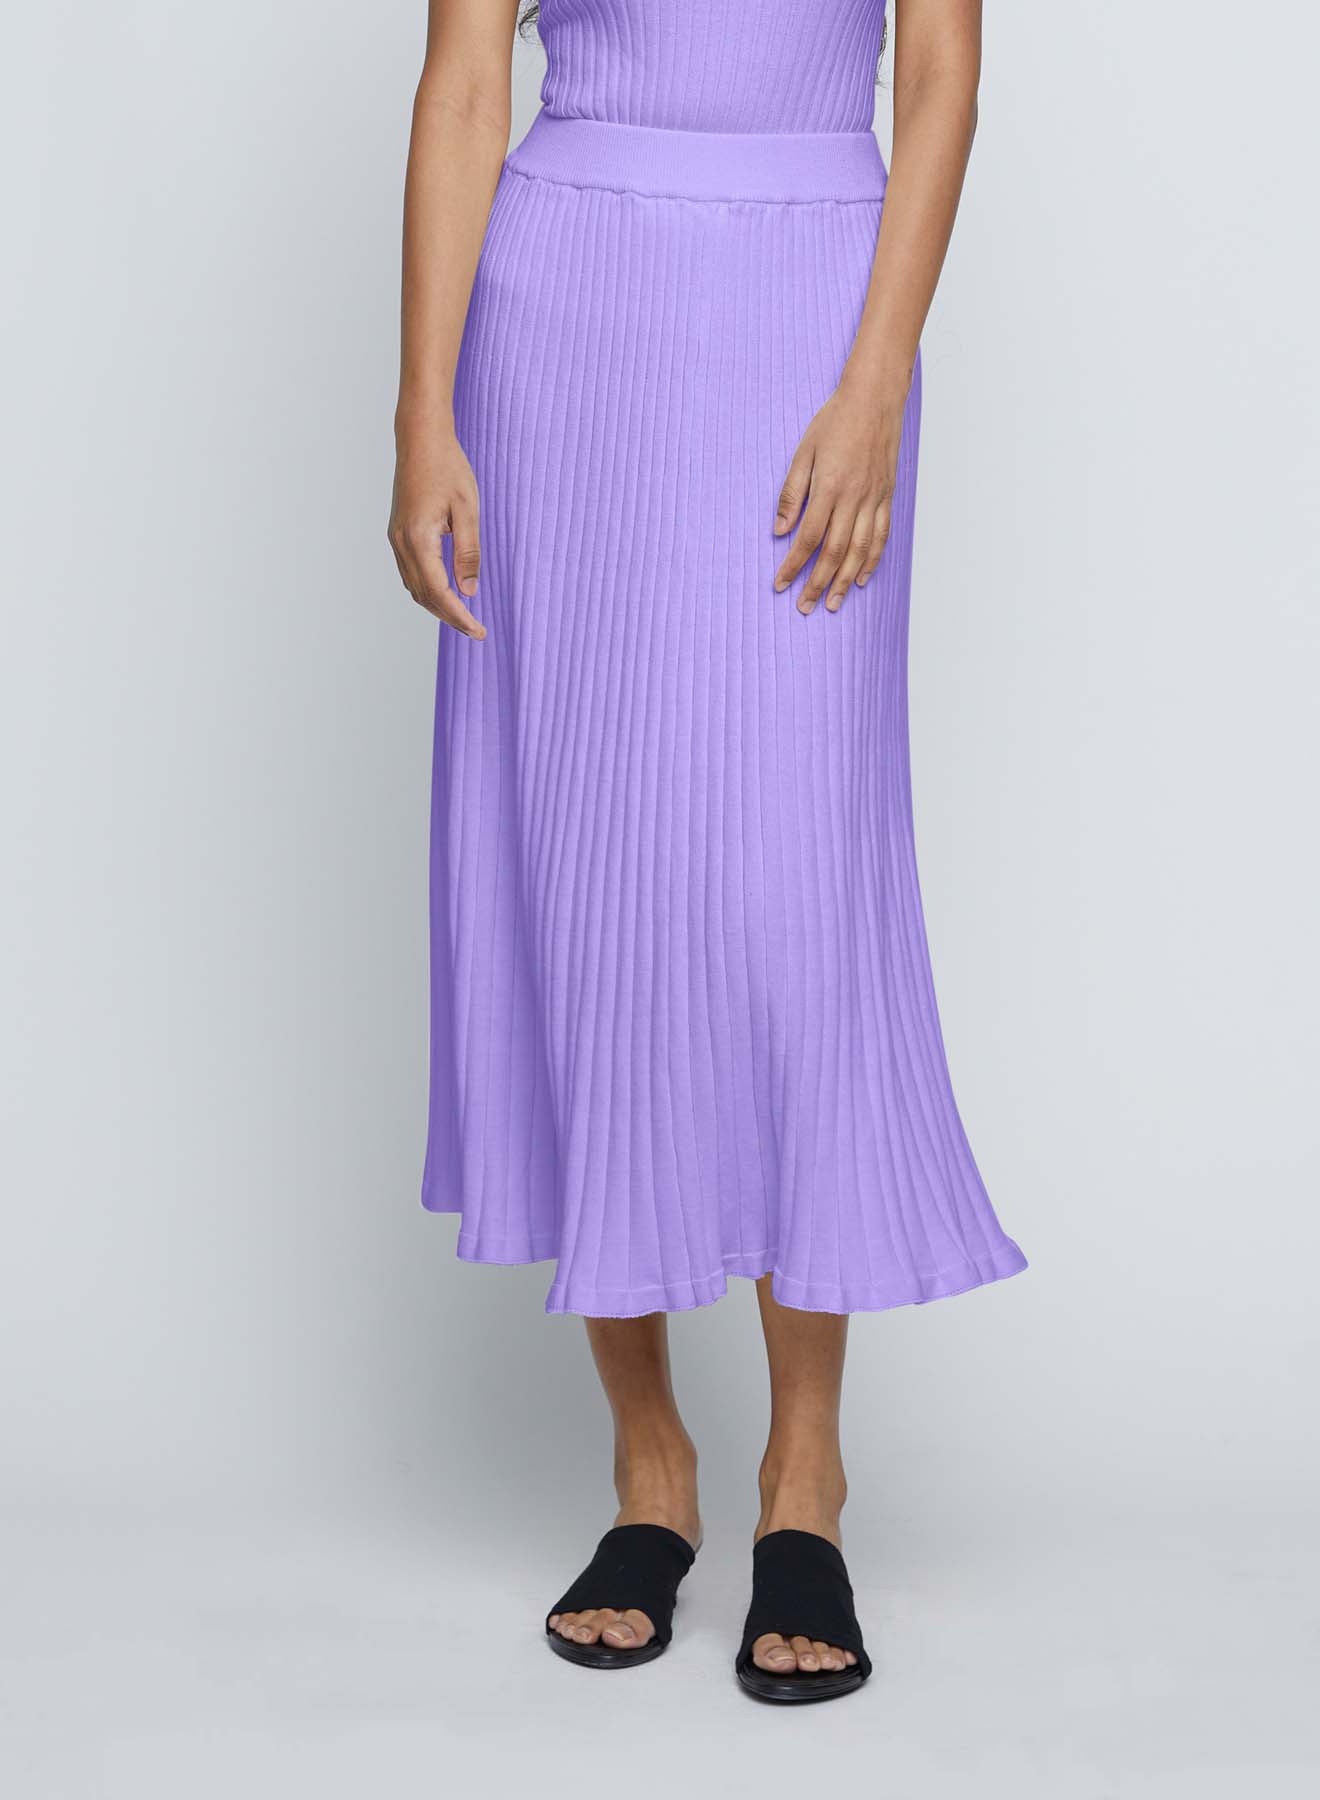 CLEO SKIRT (PERIWINKLE)